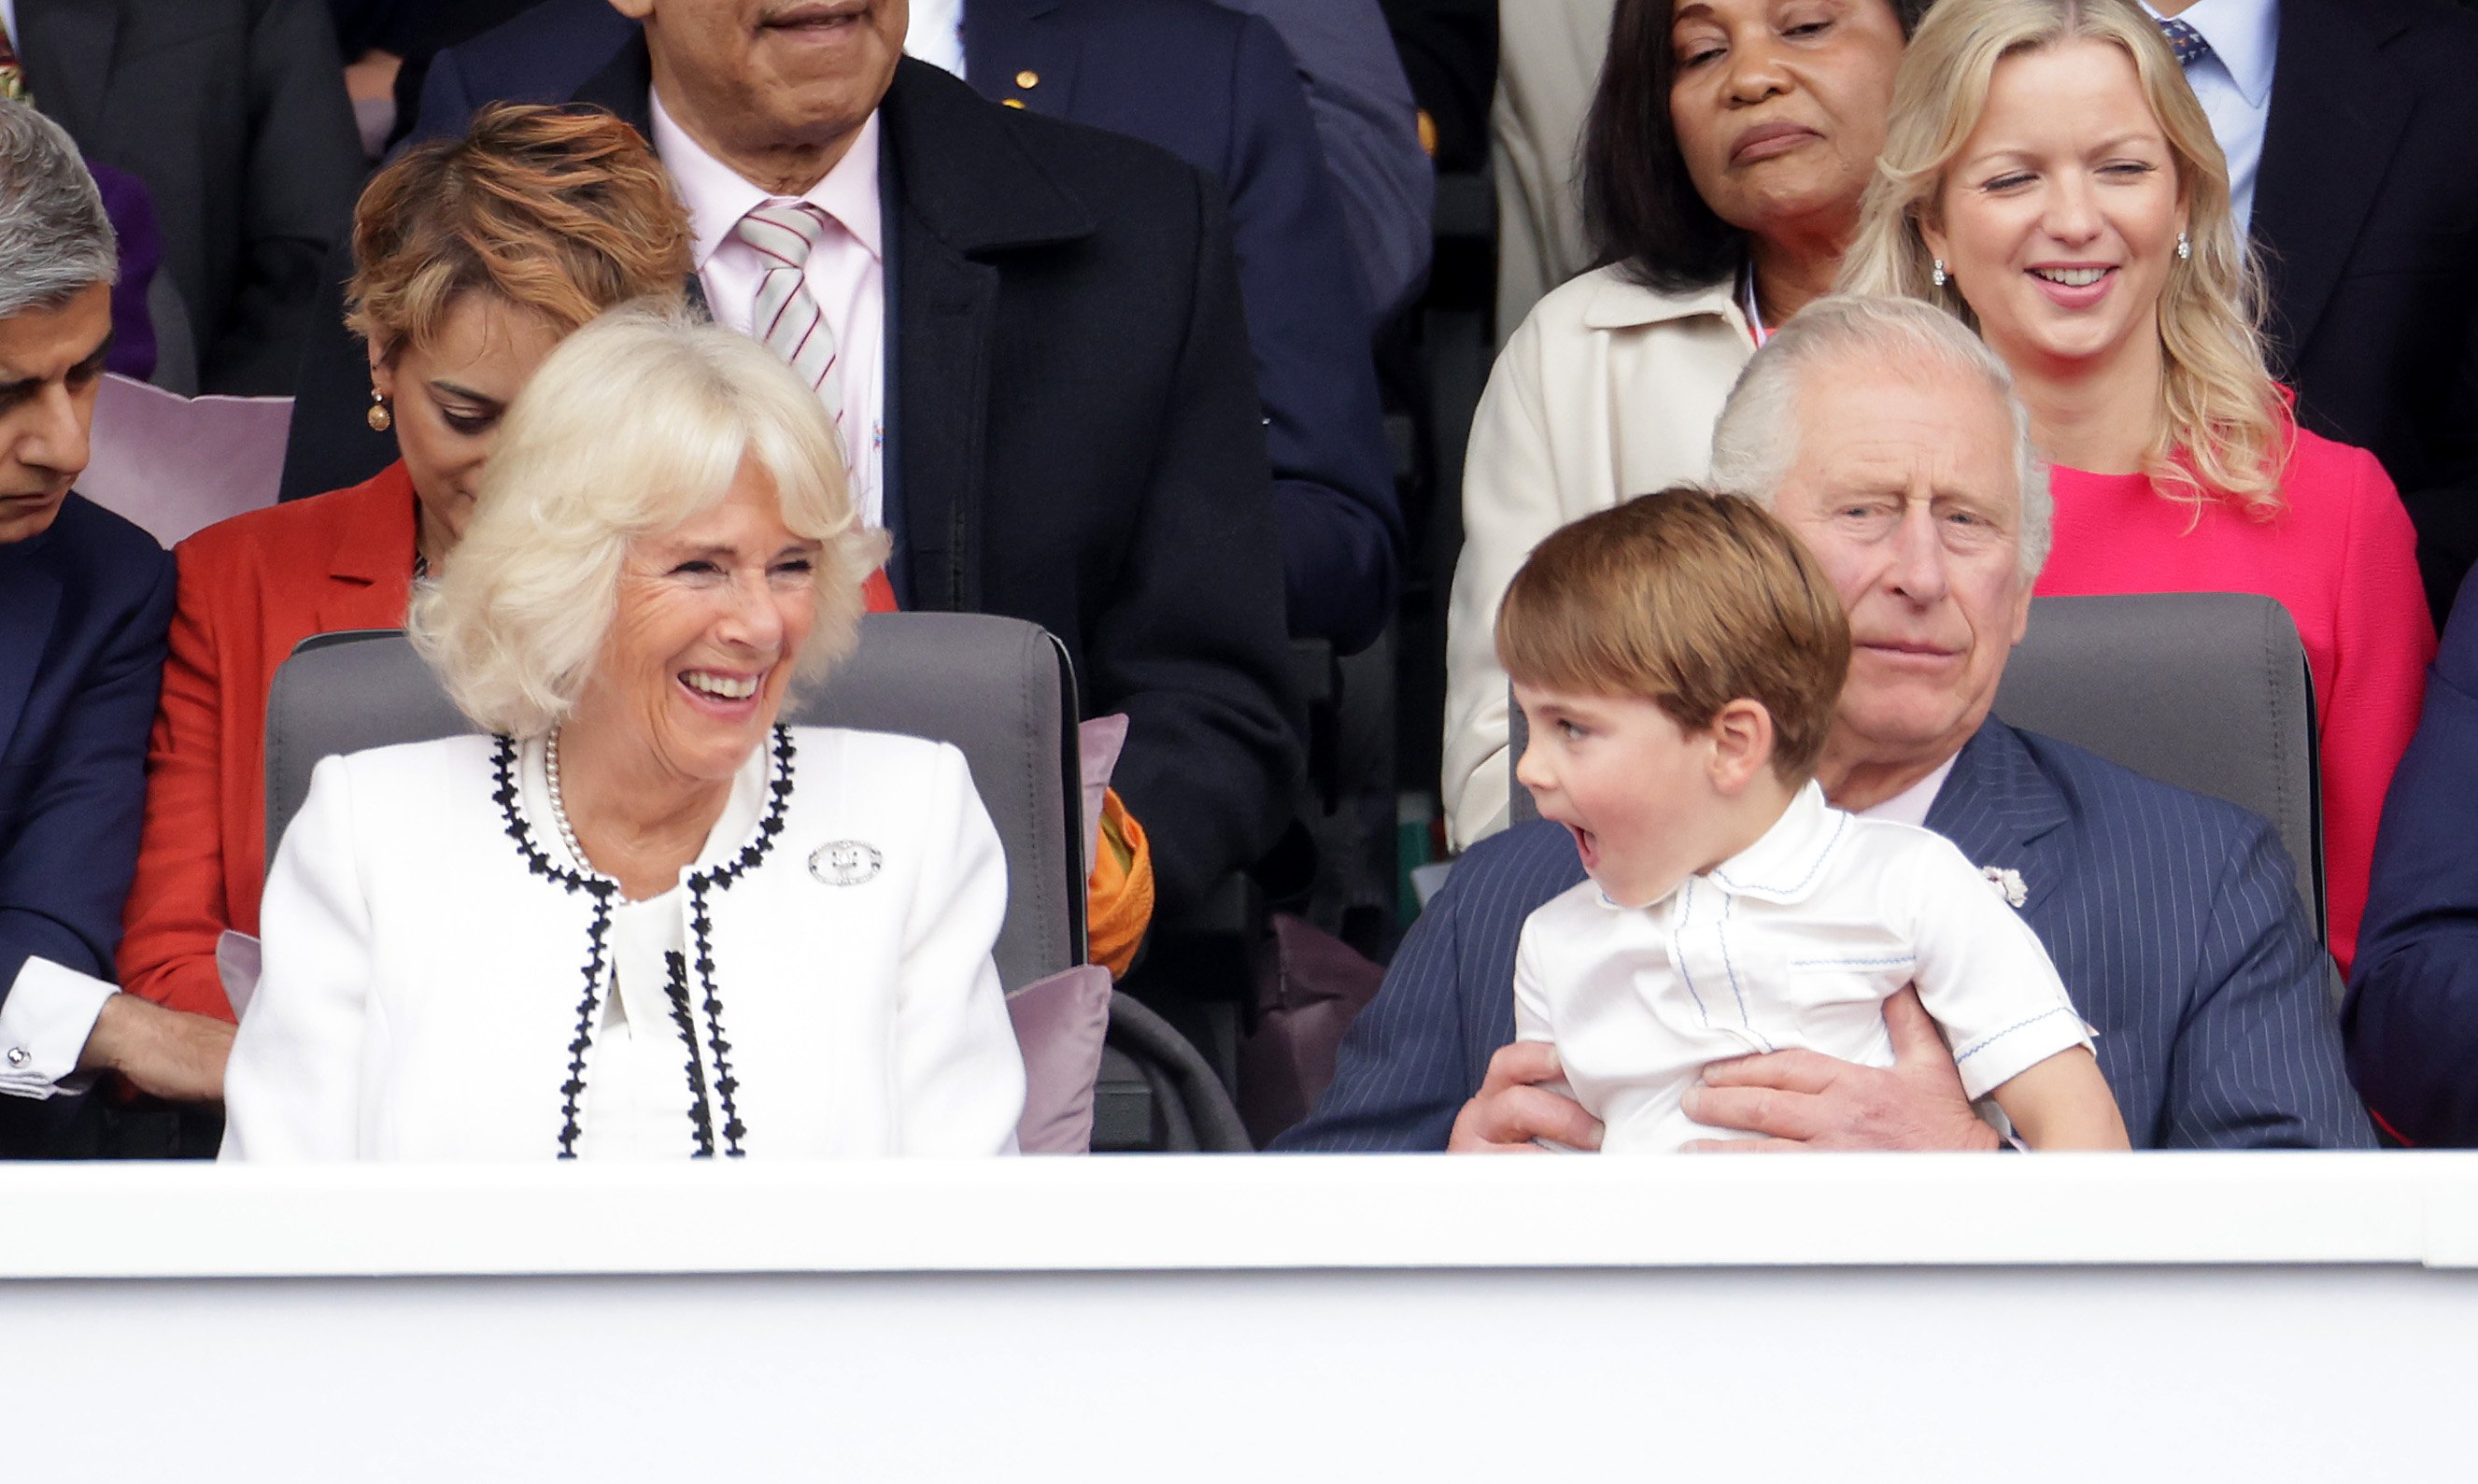 Camilla Parker Bowles, Prince Charles, and Prince Louis on his grandpa's knee at the Platinum Jubilee Pageant